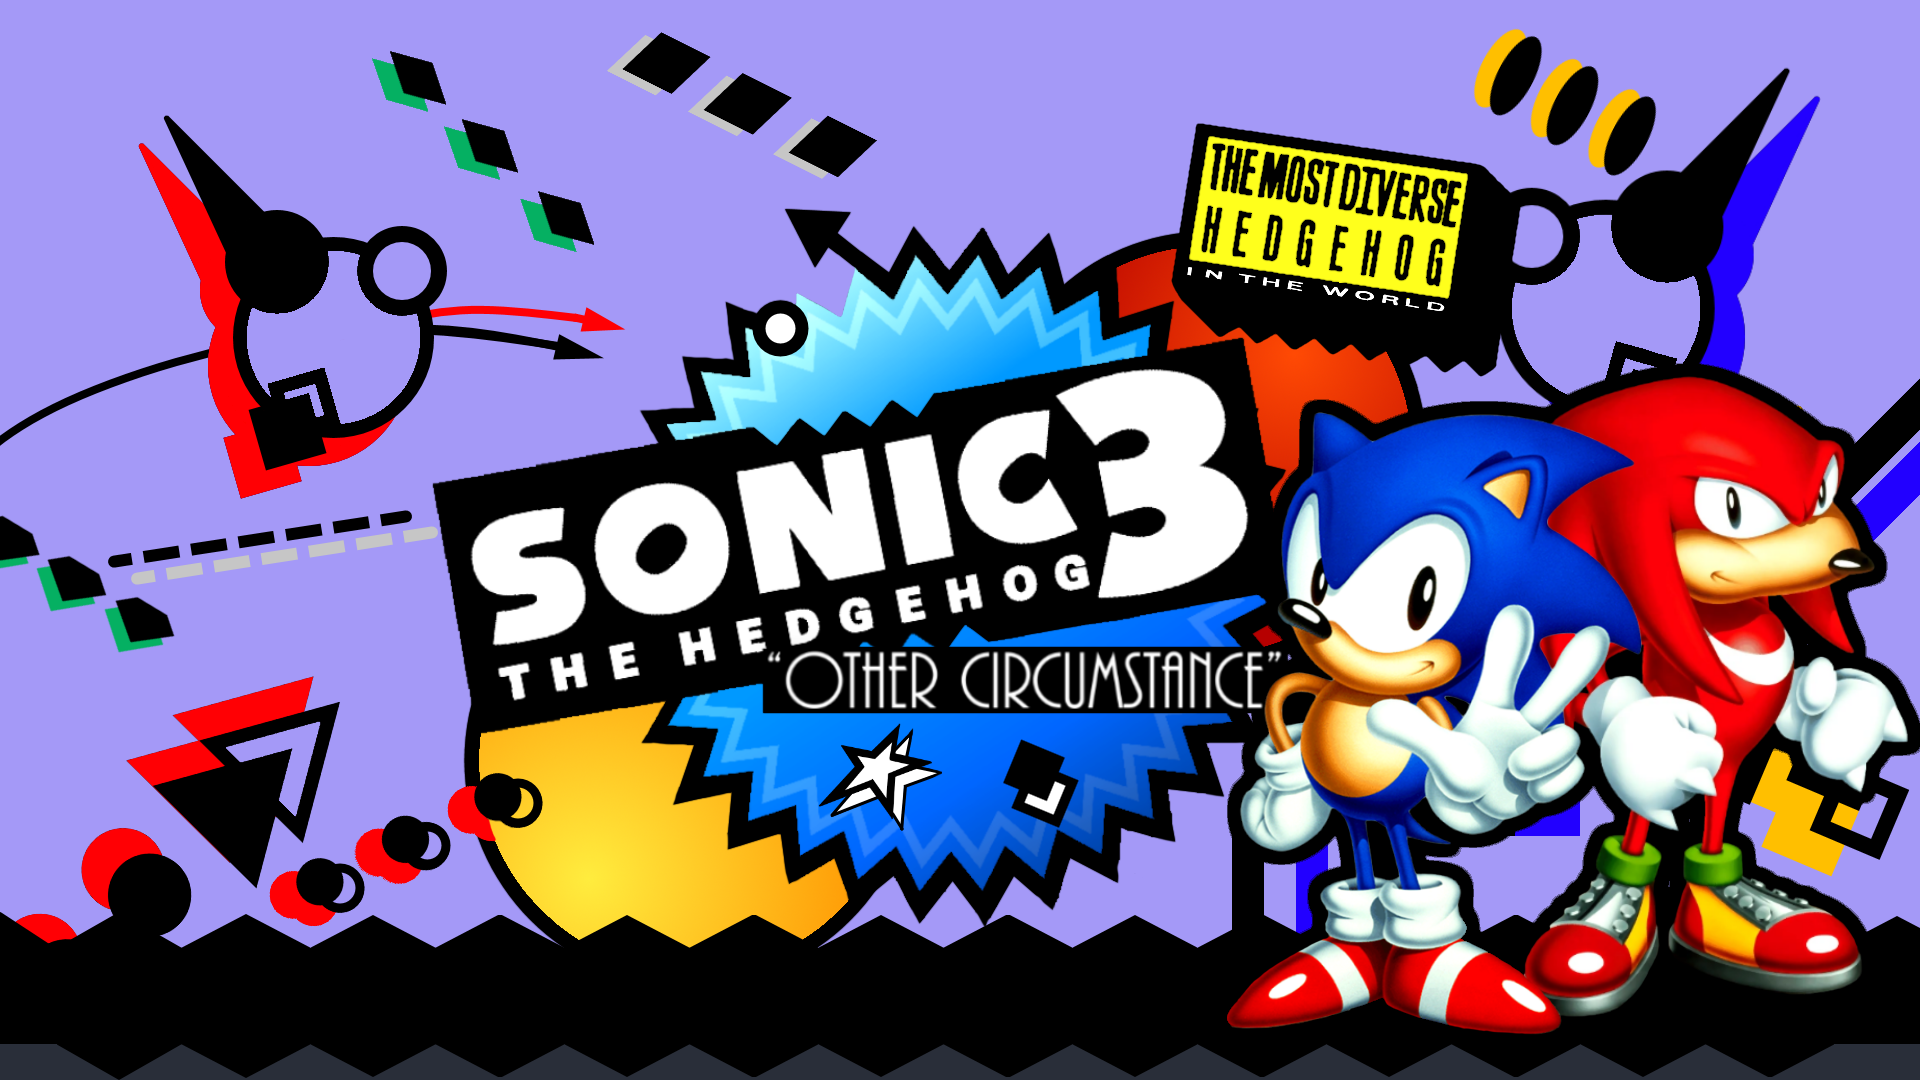 SAGE 2022 - Demo - Sonic 3: Other Circumstance